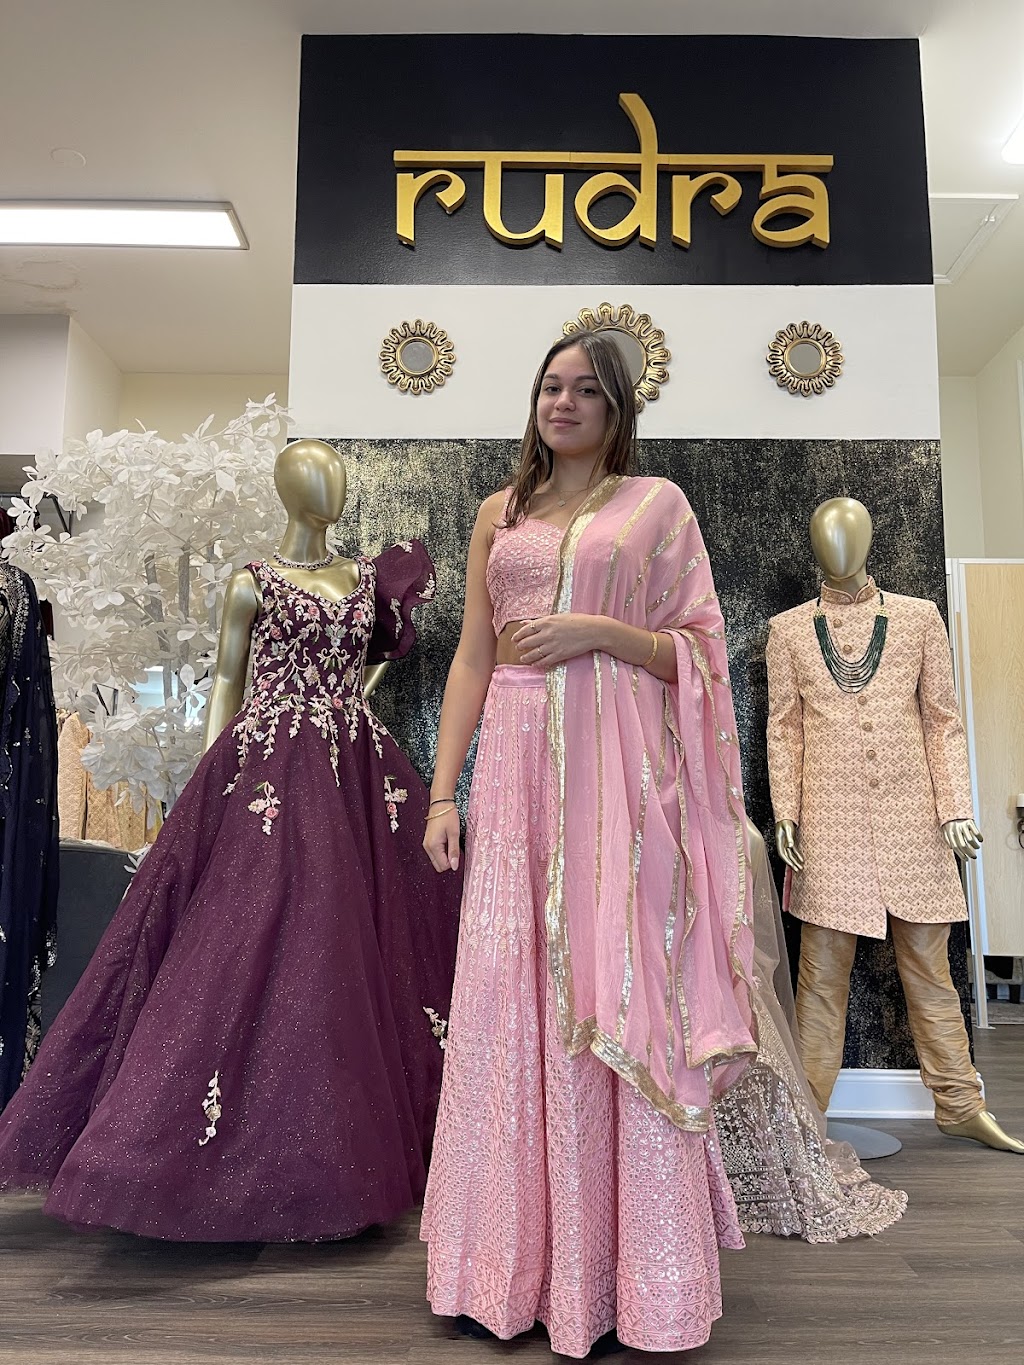 Rudra by SeemaApparel | 288 Lancaster Ave Suite2 Bldg2, Malvern, PA 19355 | Phone: (484) 467-8501